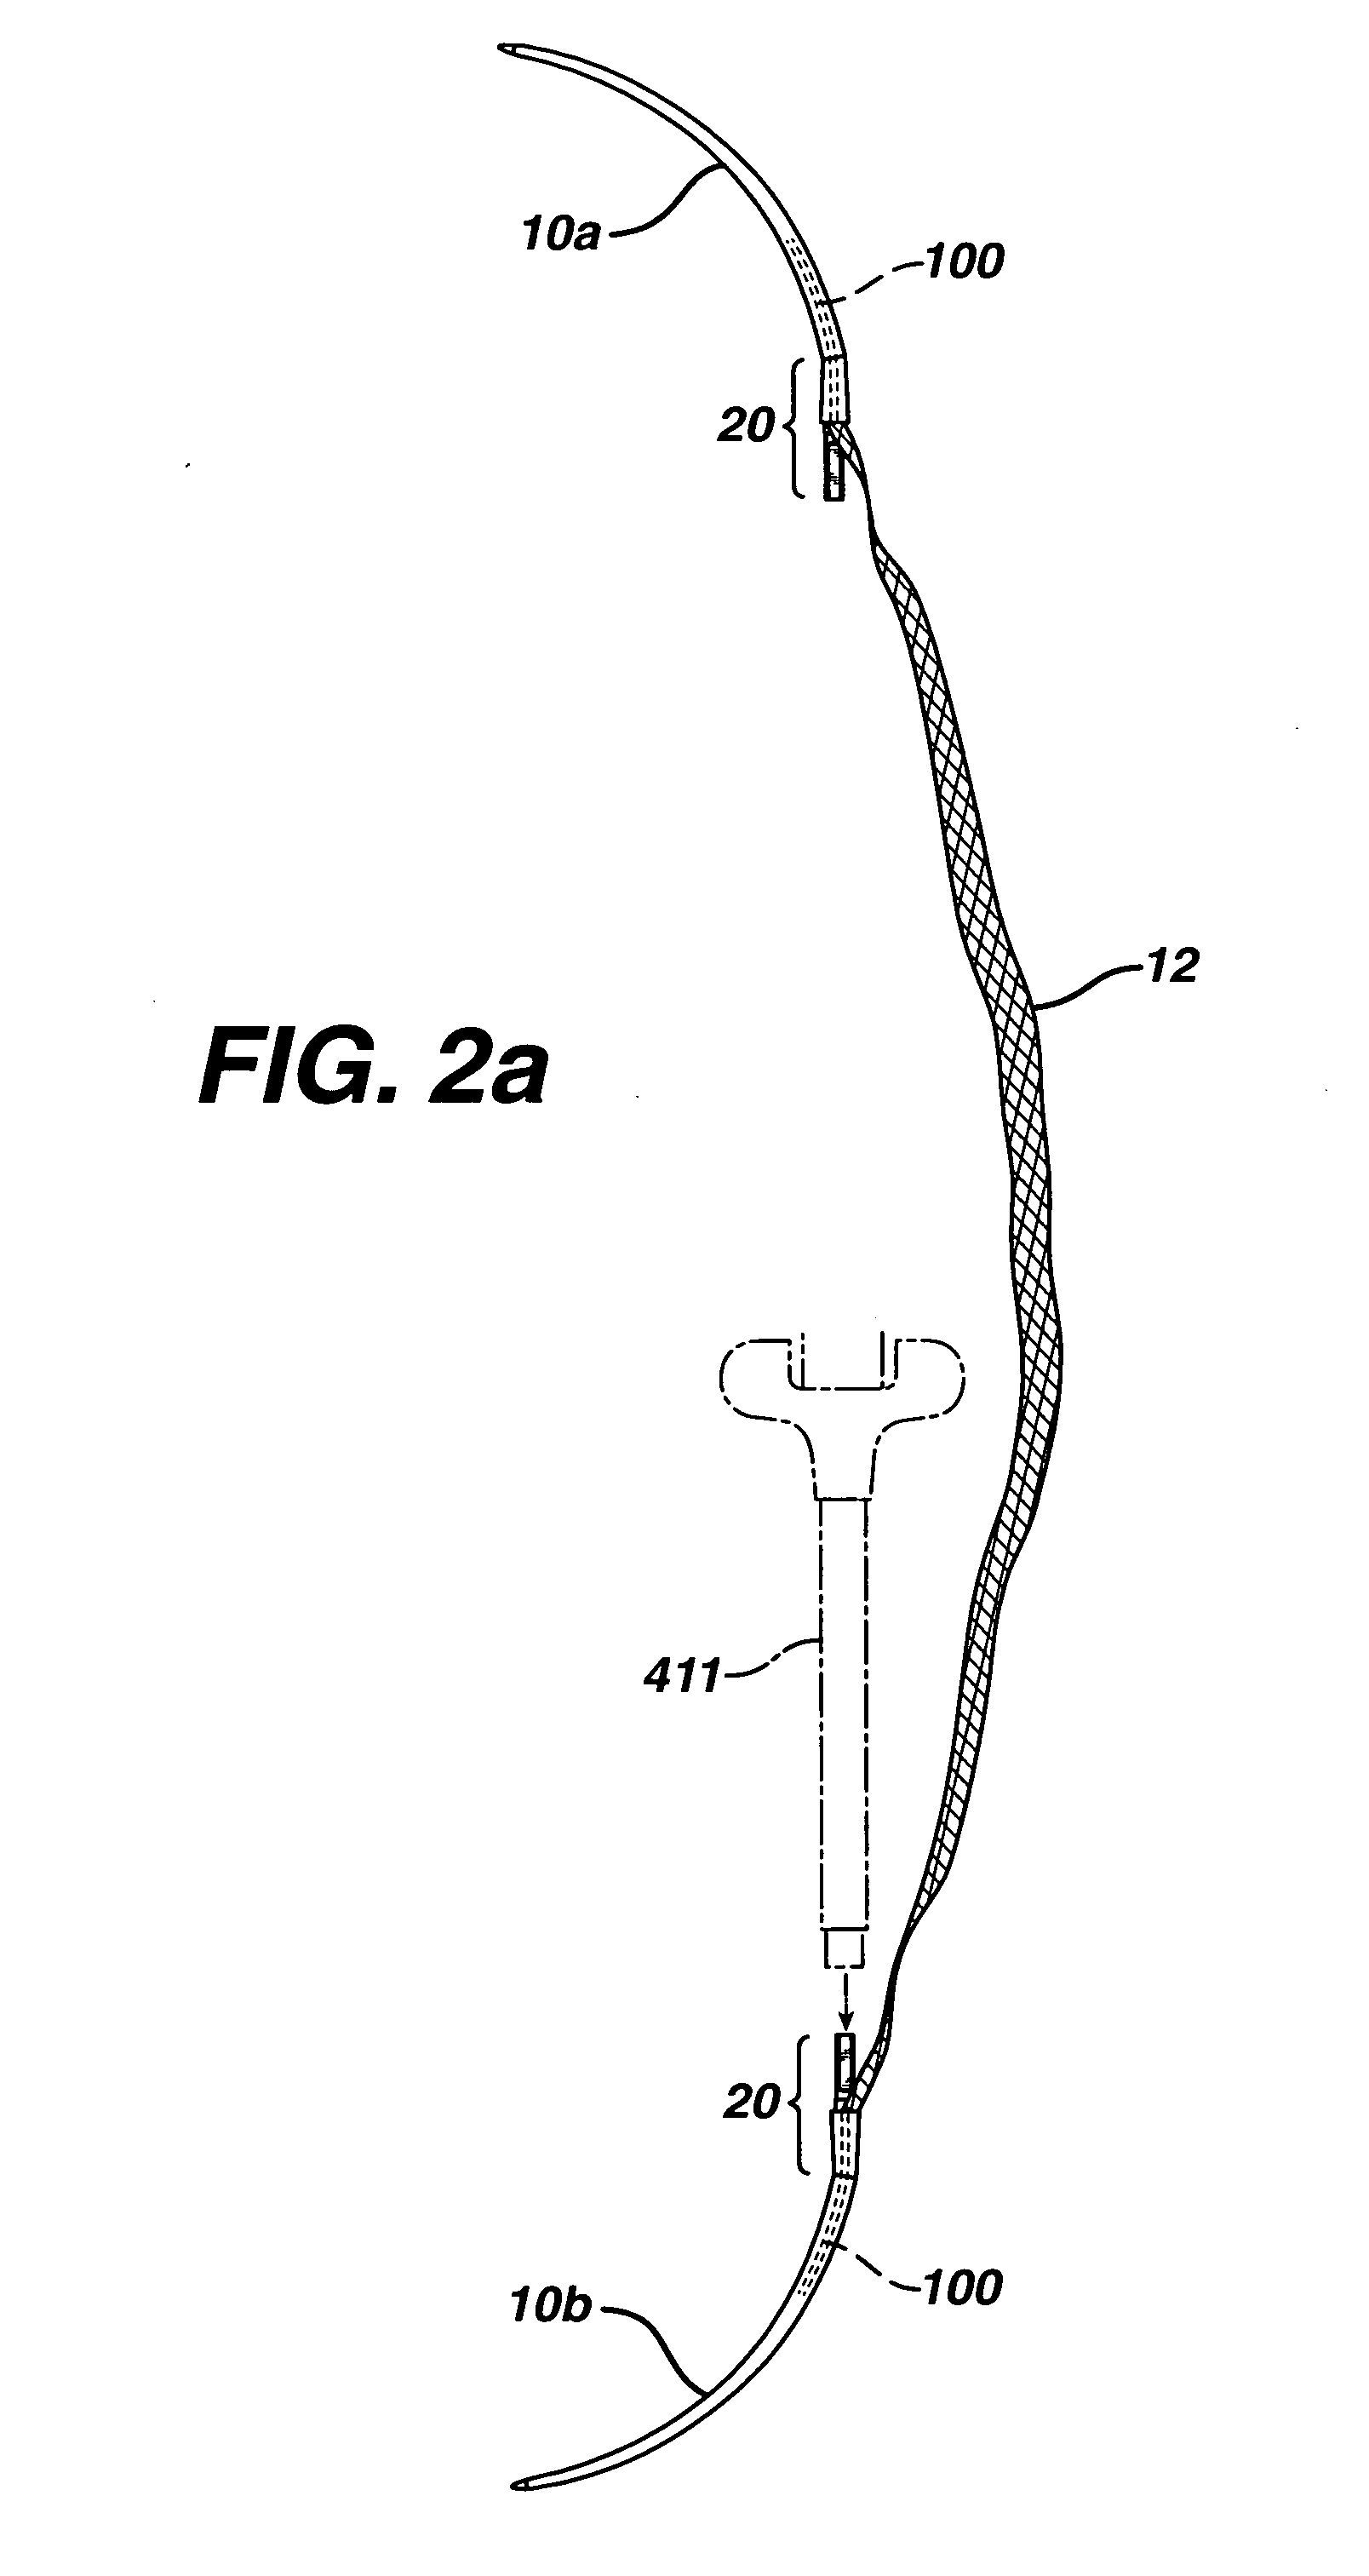 Method and apparatus for adjusting flexible areal polymer implants